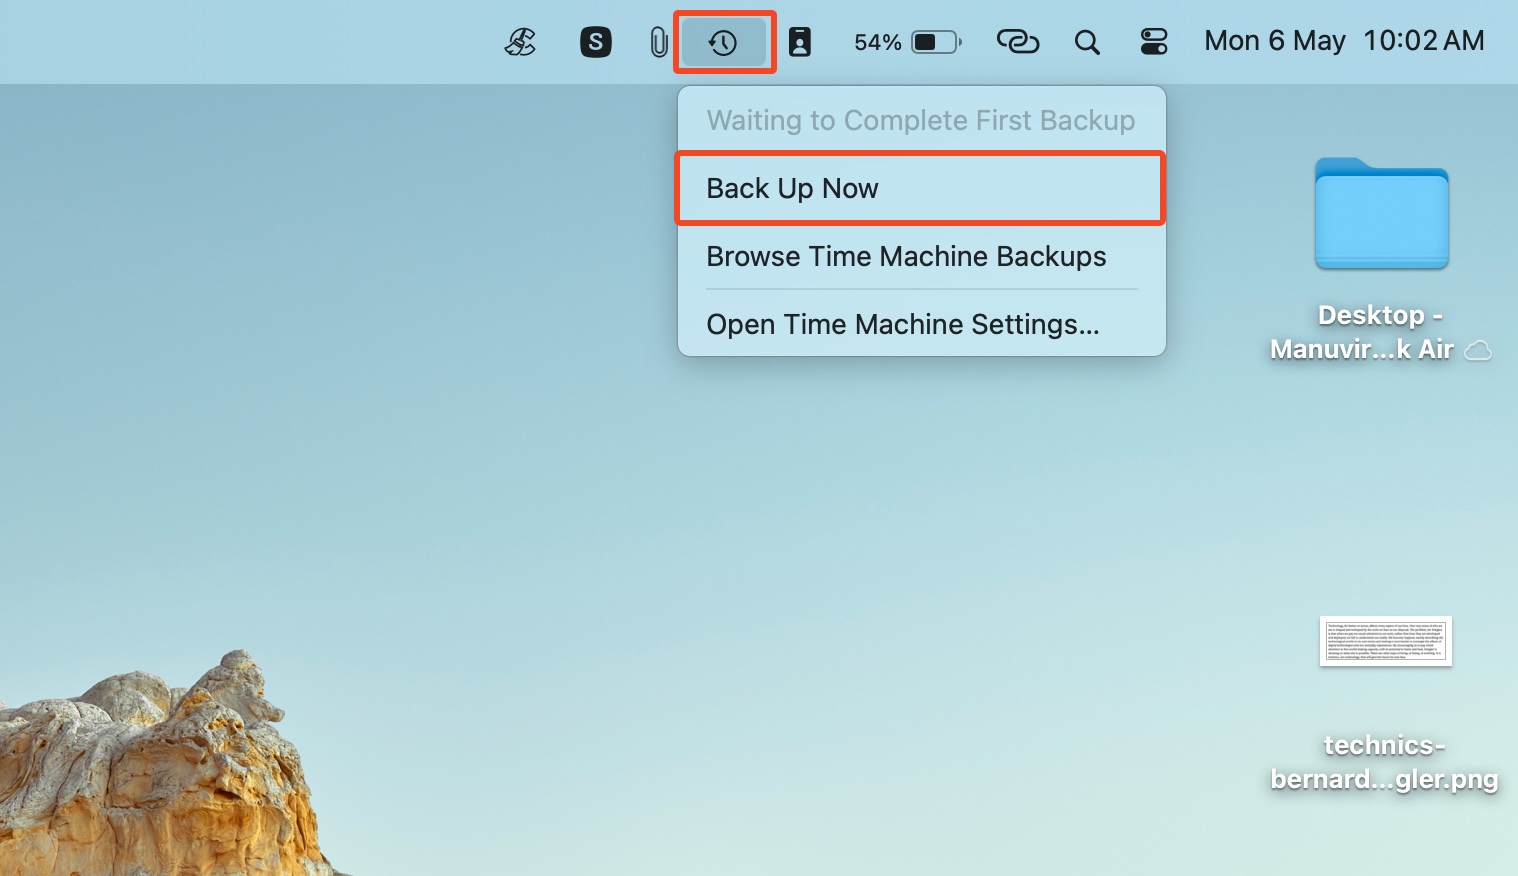 Time Machine icon clicked in the macOS menu bar, showing dropdown options including "Back Up Now" and "Browse Time Machine Backups."